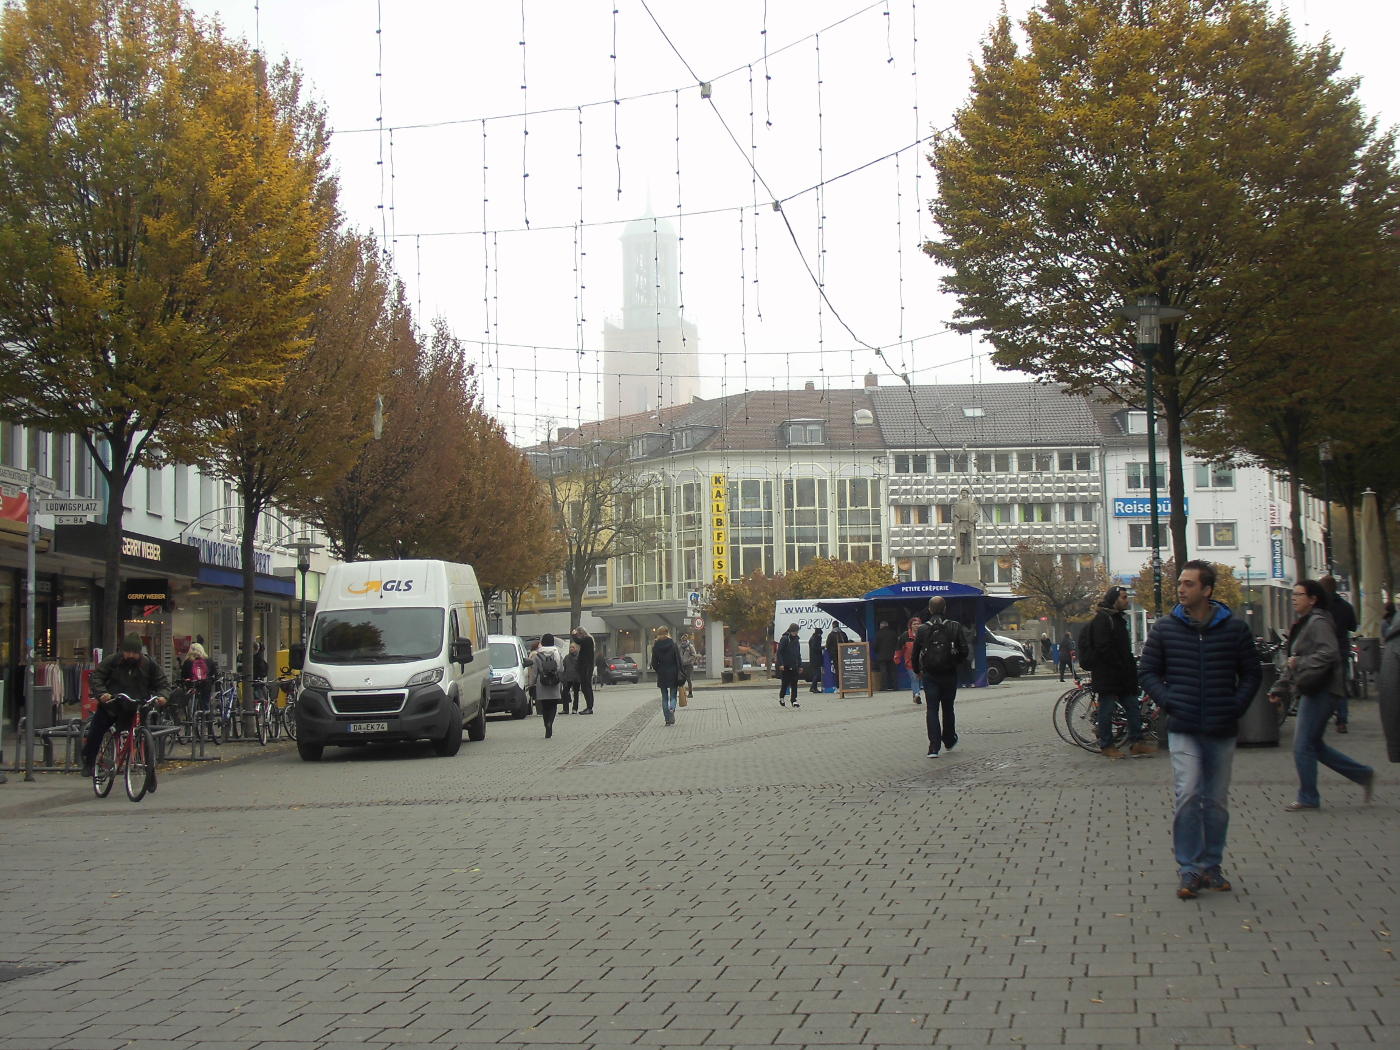 No Jehovah's Witnesses in Darmstadt on 01.11.2016